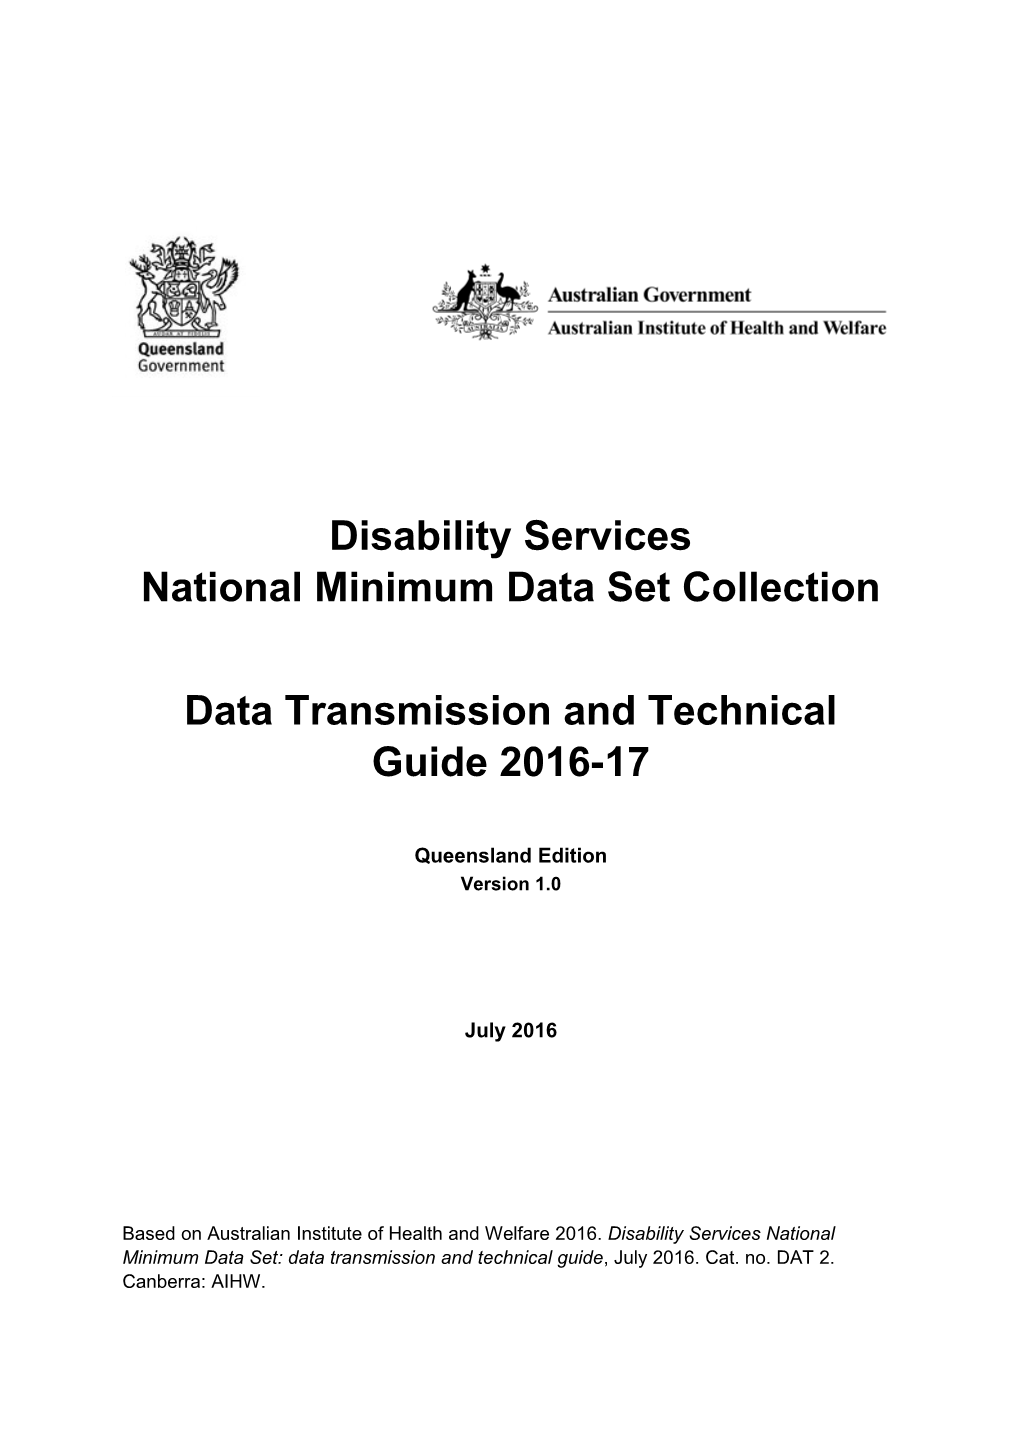 DS NMDS Data Transmission and Technical Guide 2011-12